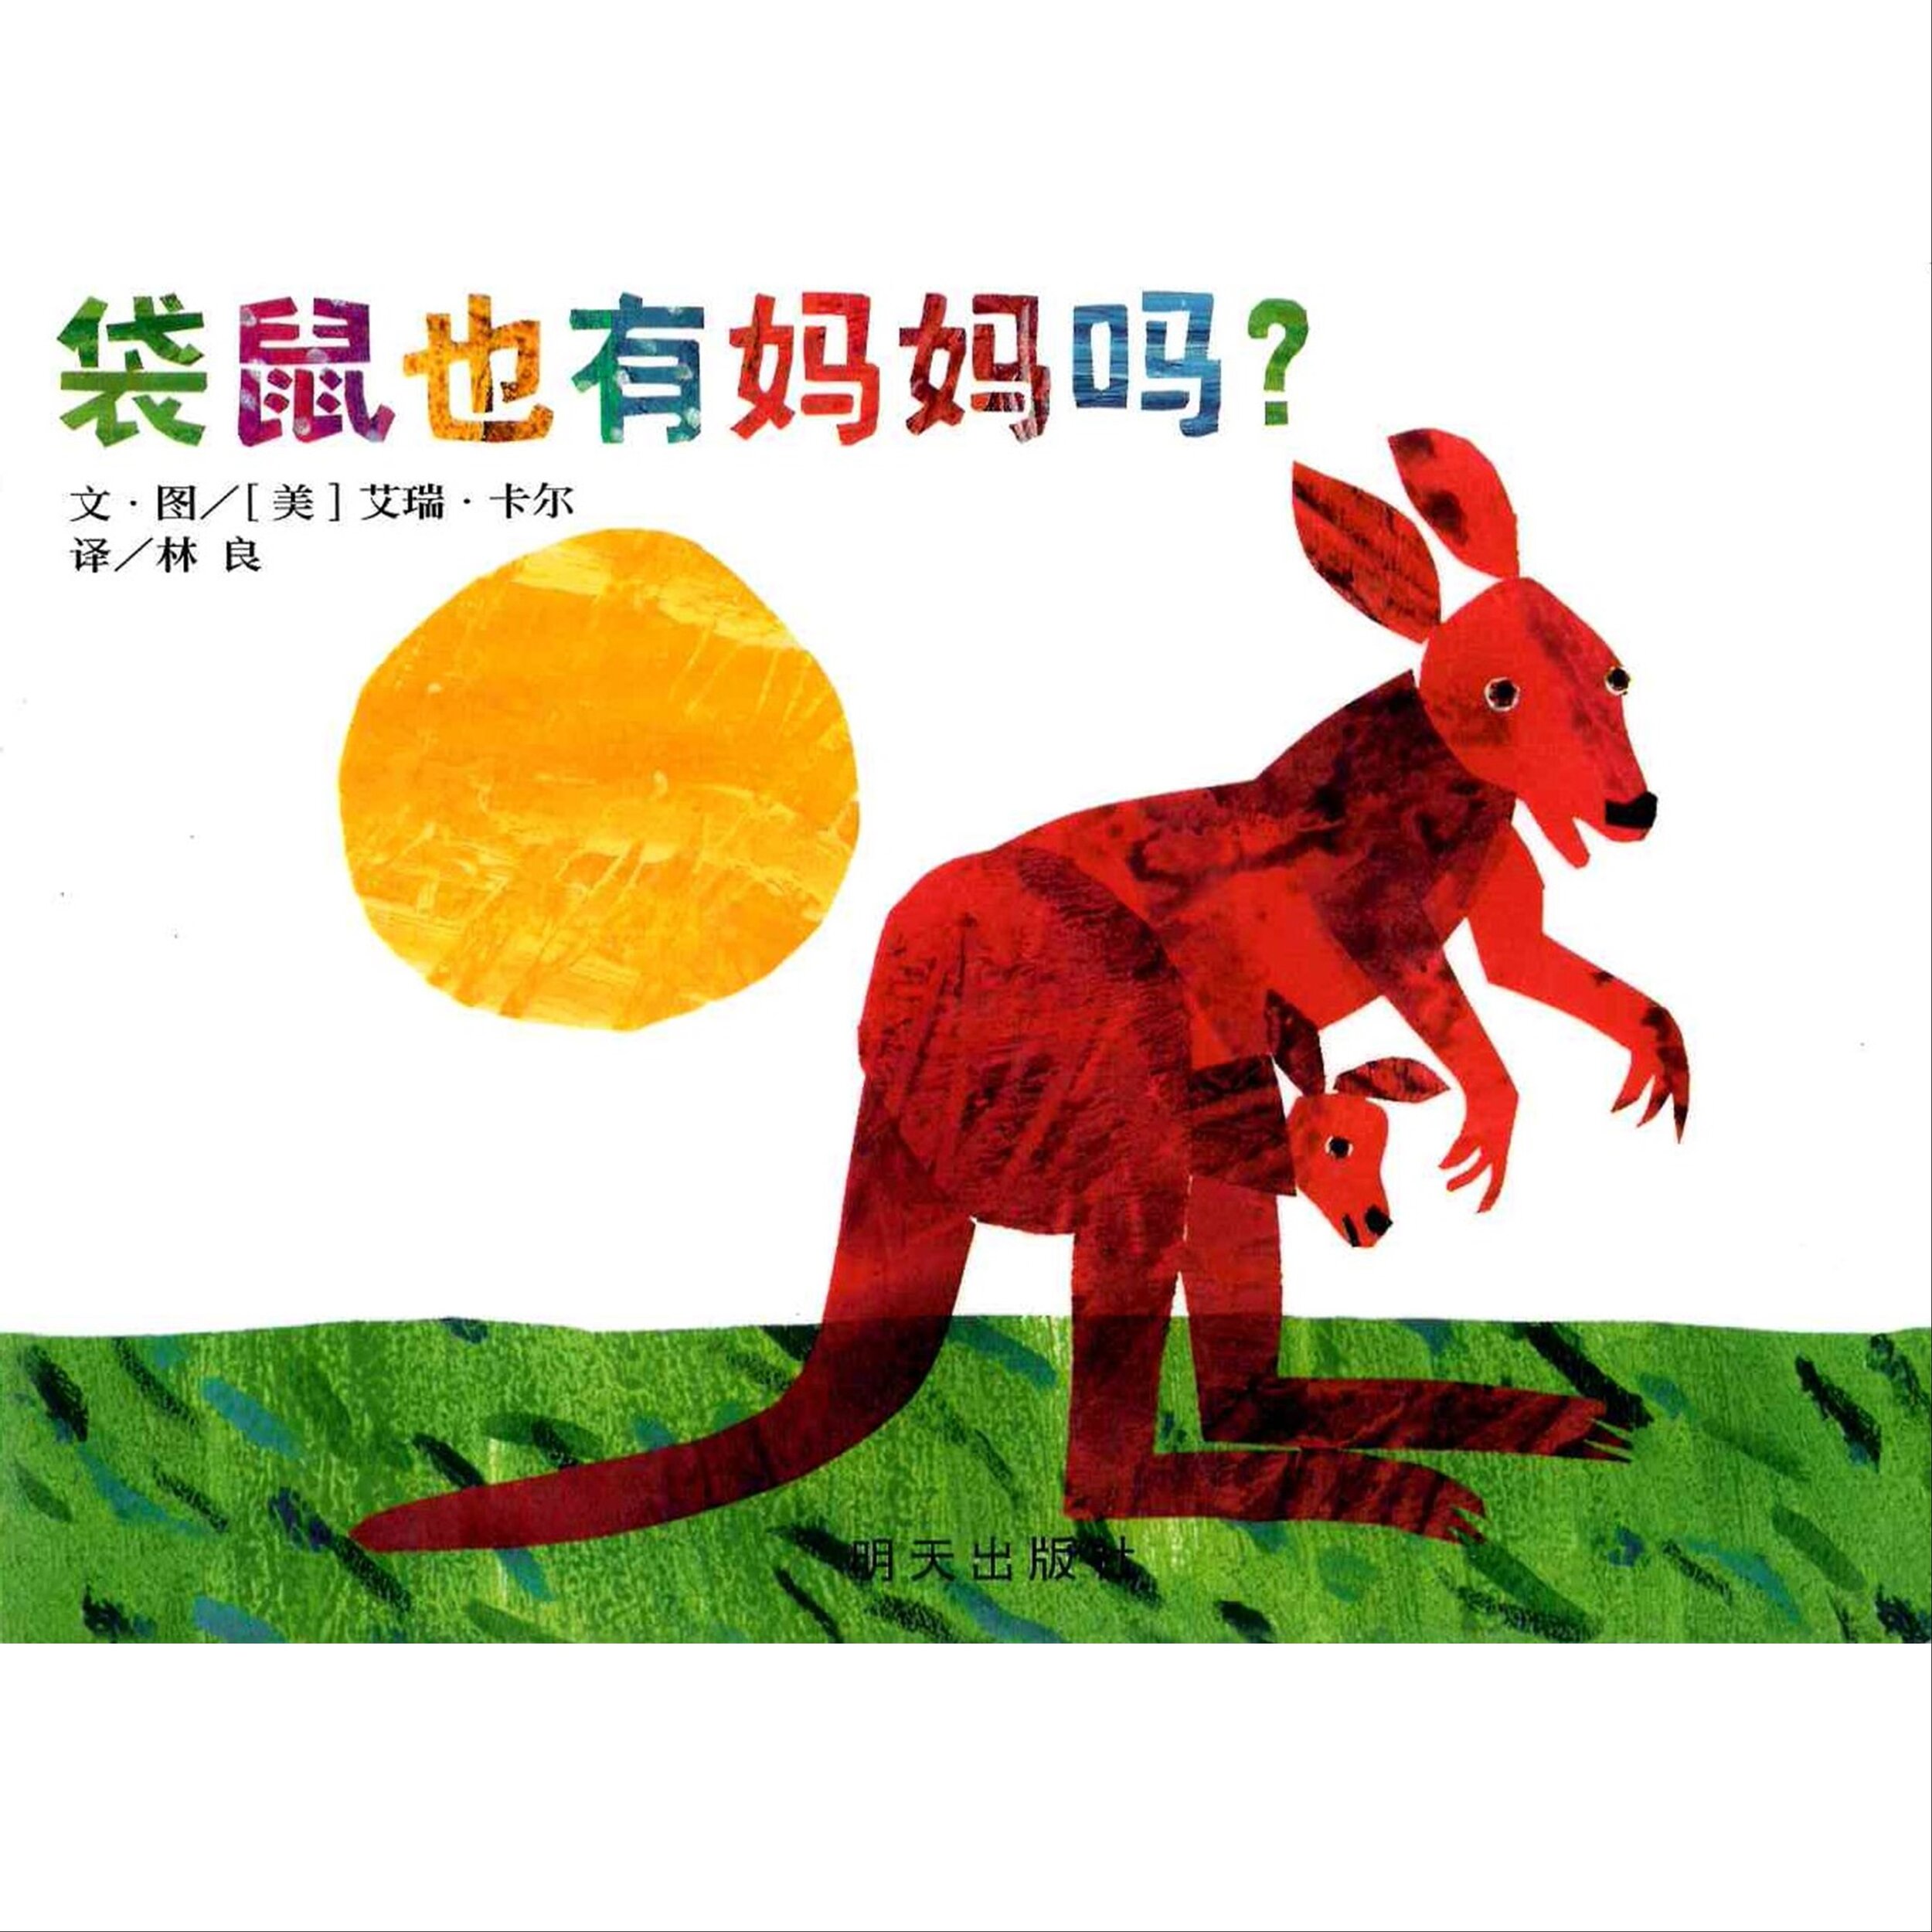 Does A Kangaroo Have A Mother, Too? Simplified Chinese Translation